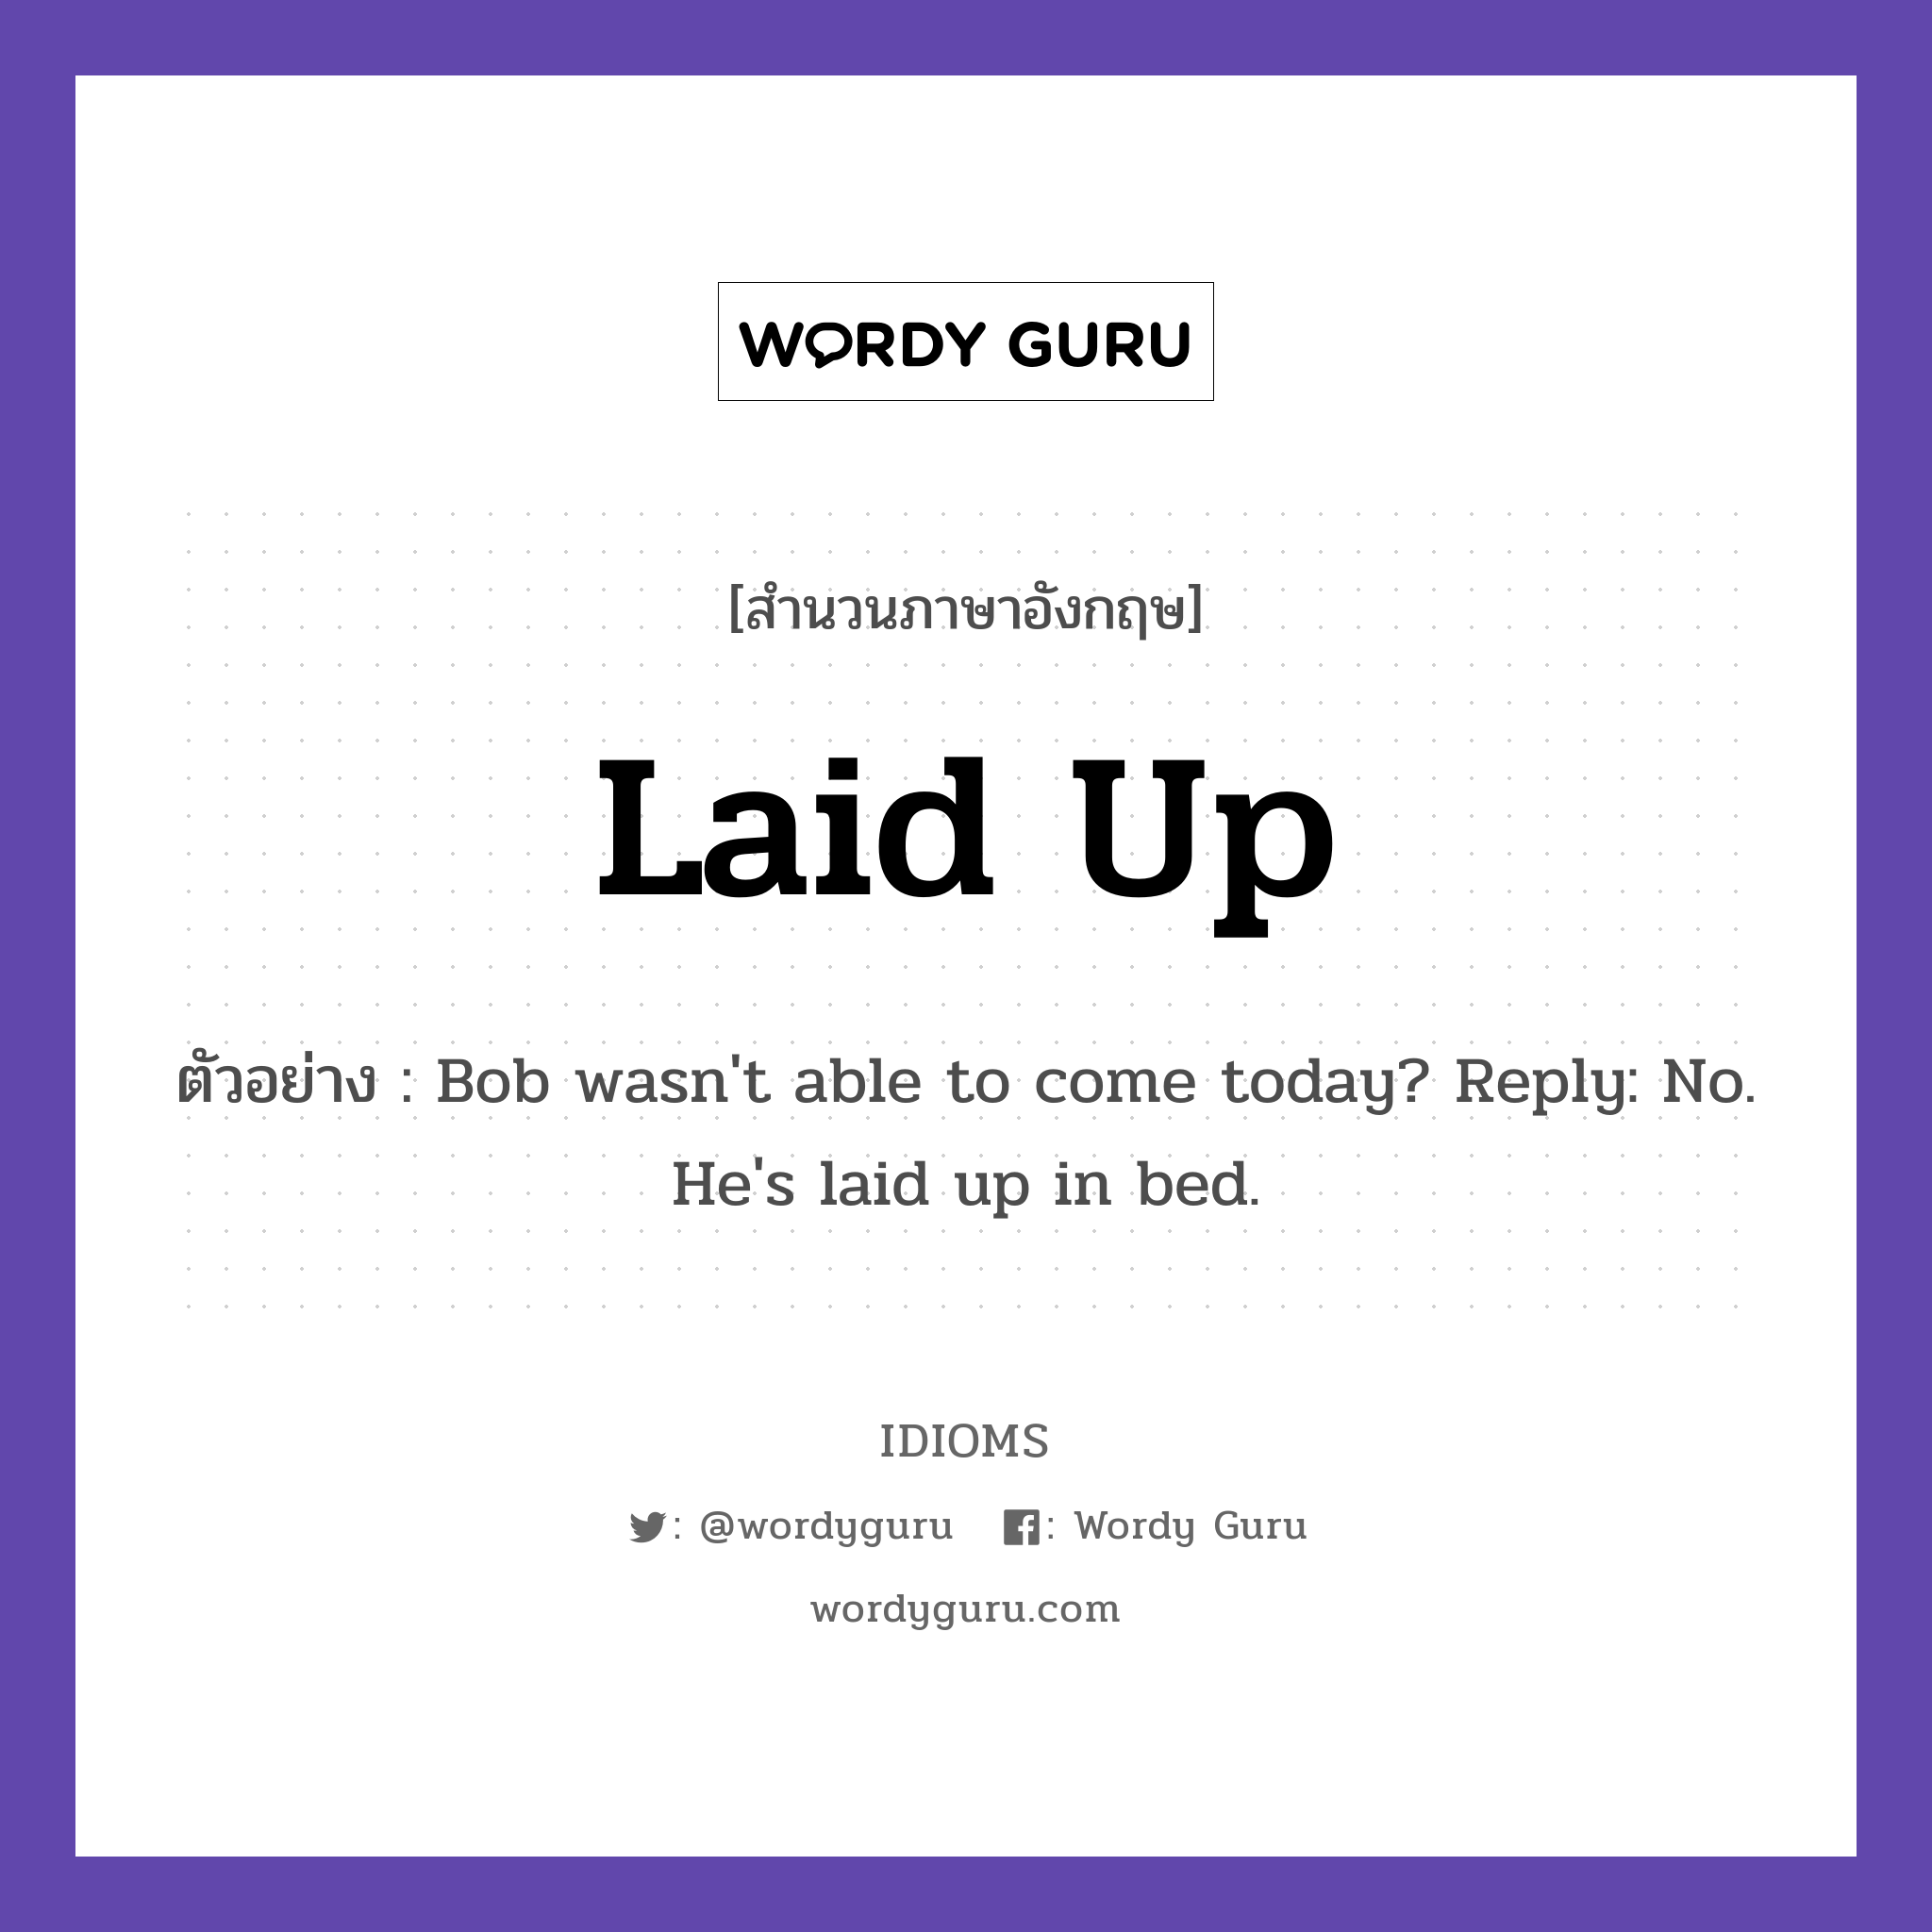 Laid Up แปลว่า?, สำนวนภาษาอังกฤษ Laid Up ตัวอย่าง Bob wasn't able to come today? Reply: No. He's laid up in bed.